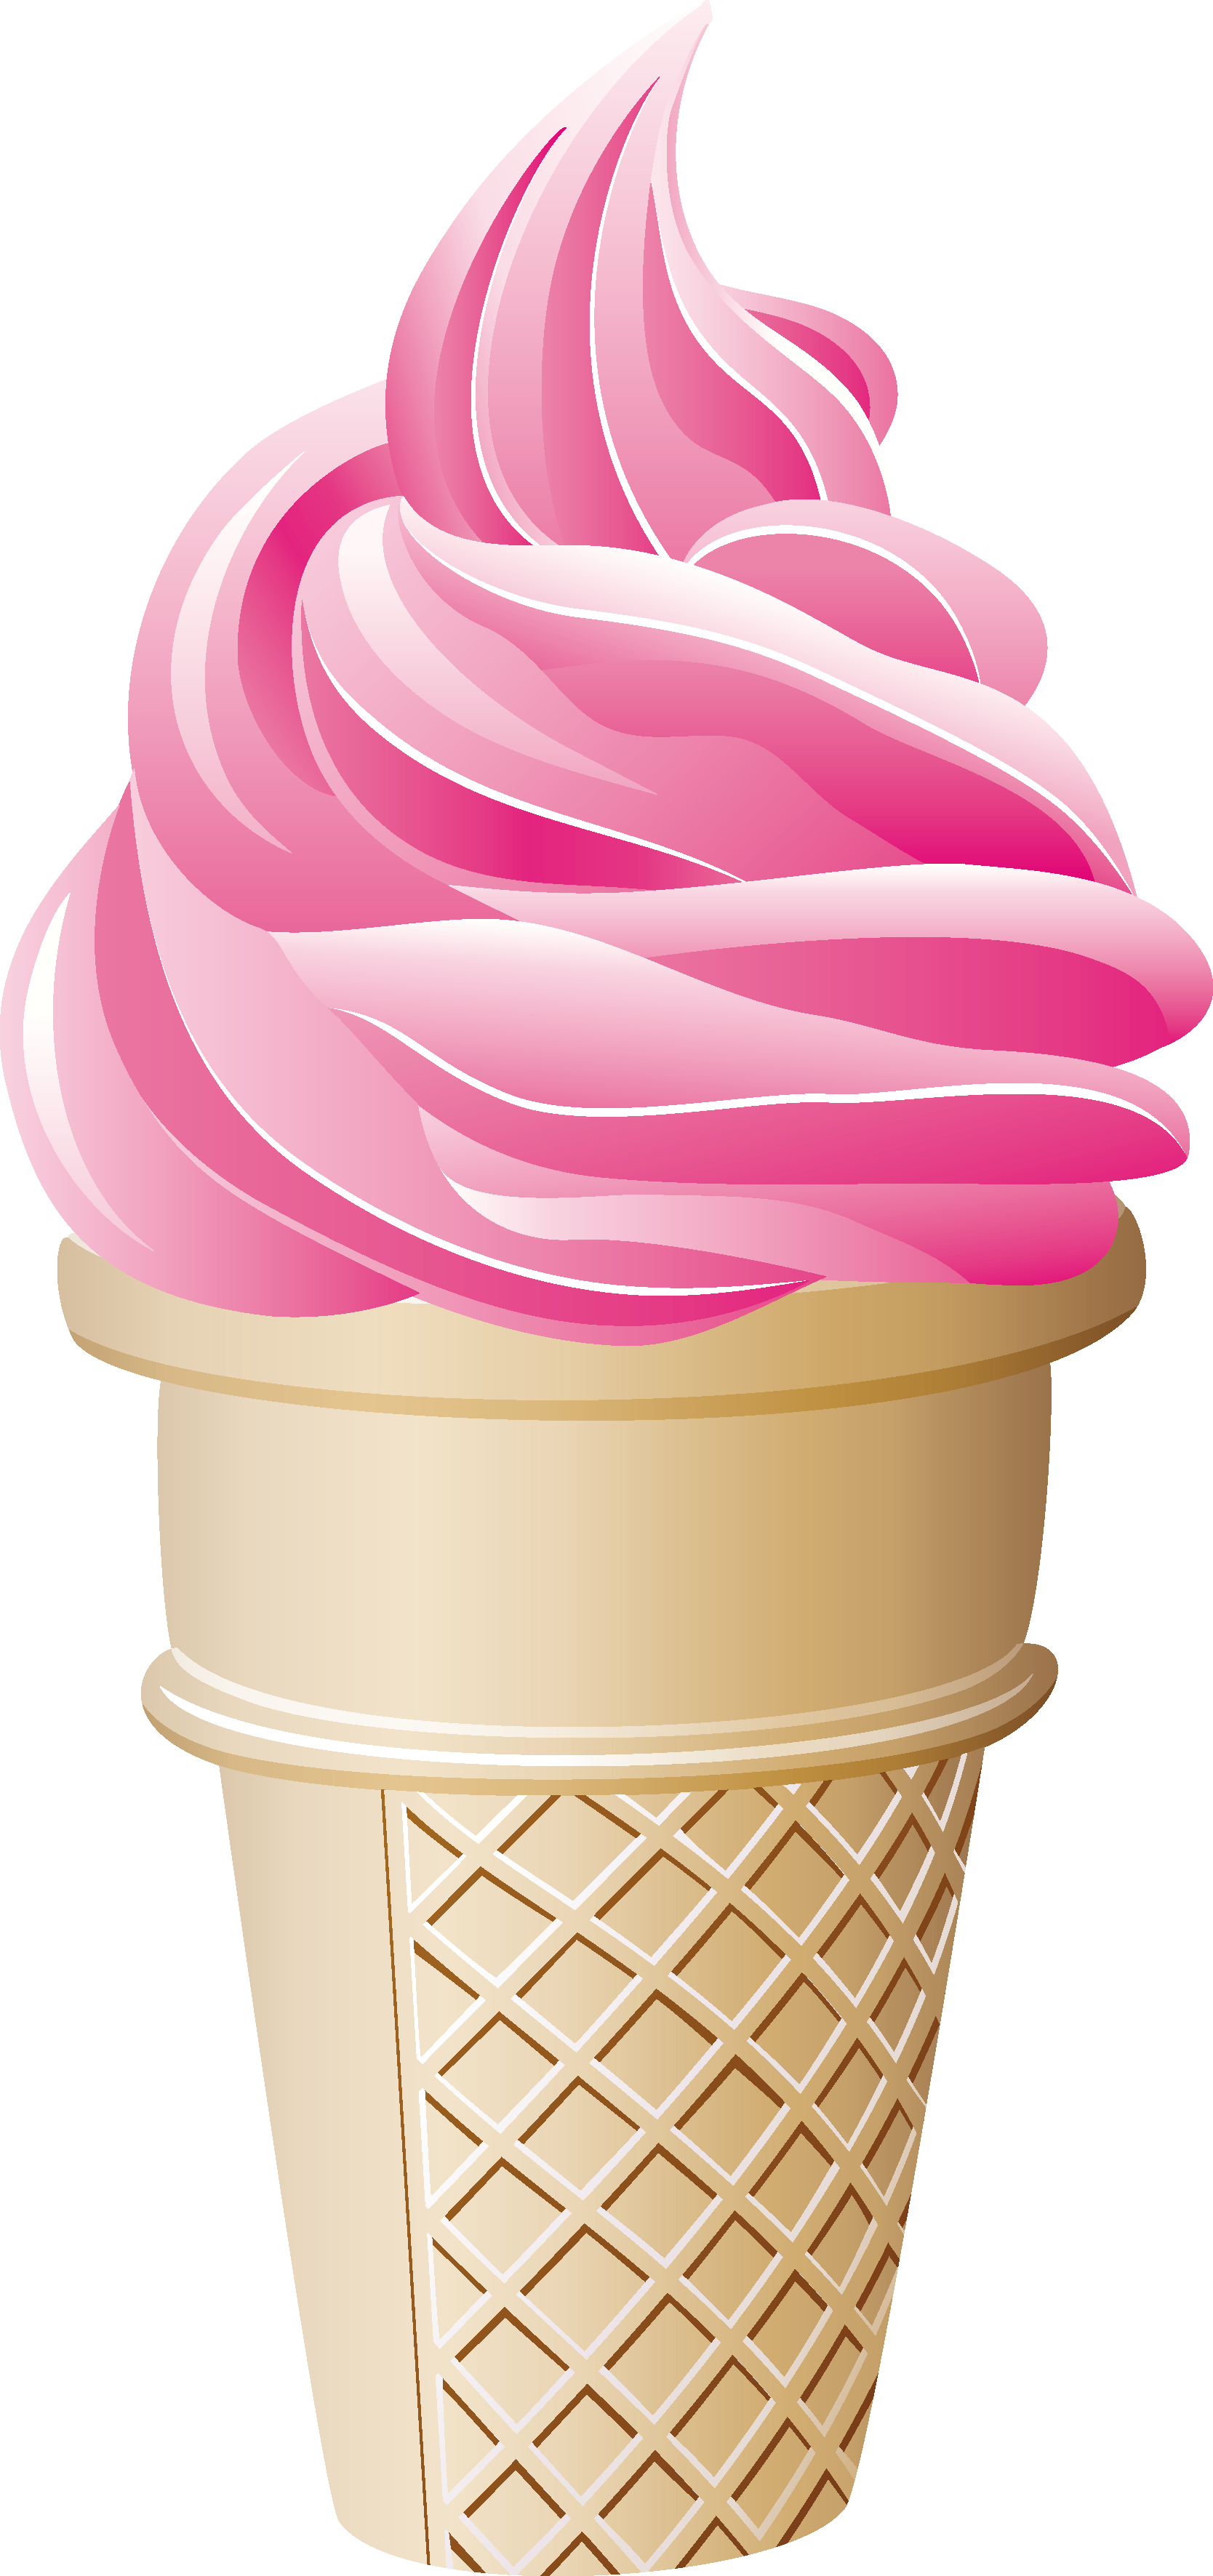 Pink ice cream png #40426 - Free Icons and PNG Backgrounds